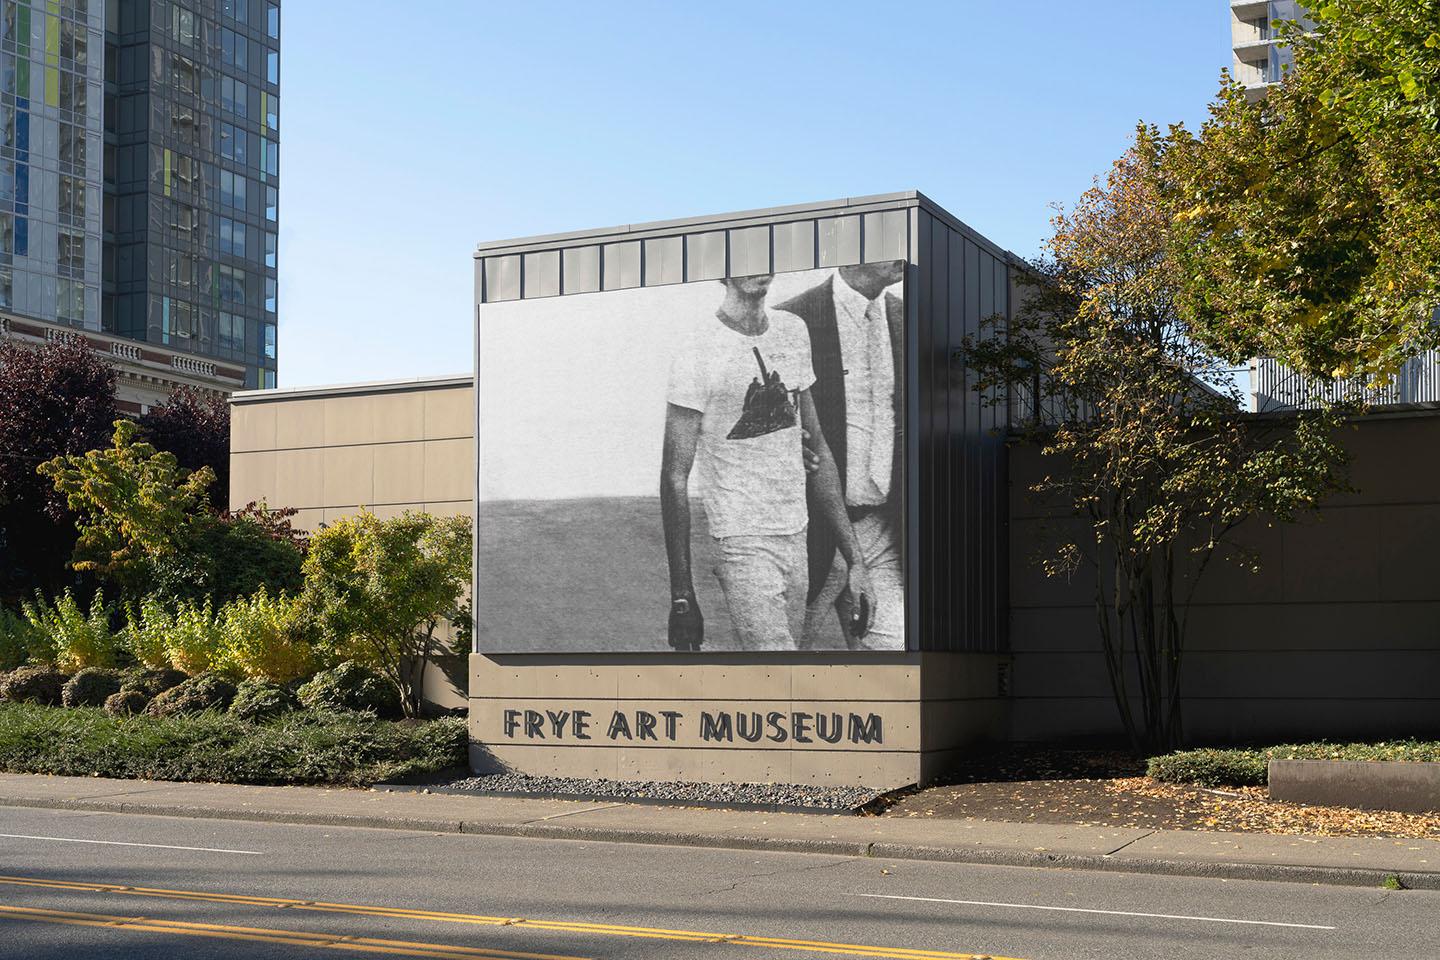 A photo of a large print on the side of the Frye Art Museum